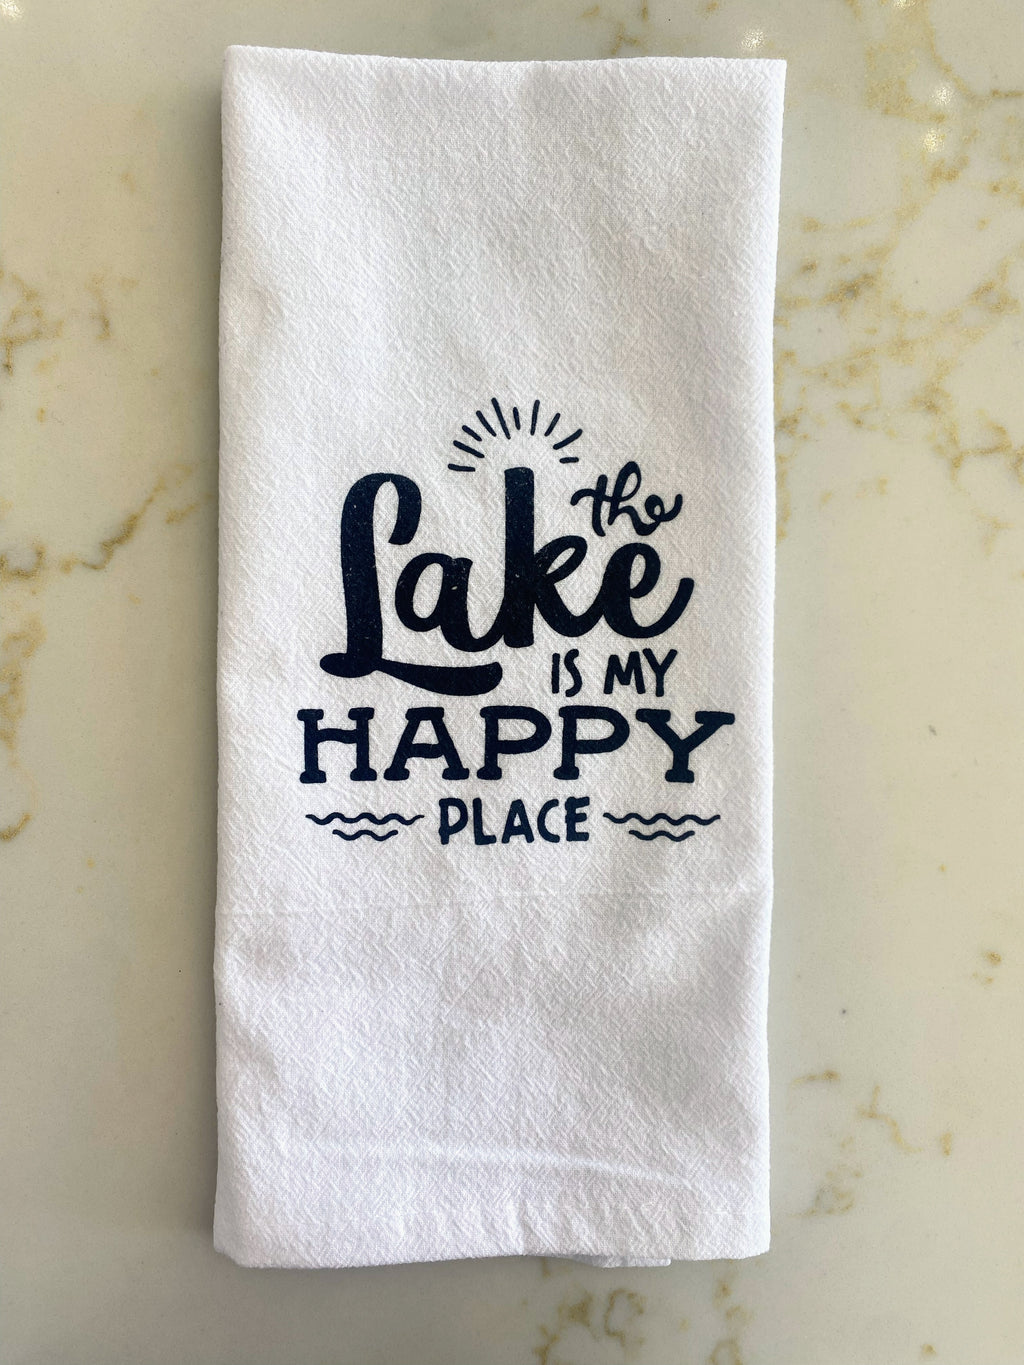 The Lake Is My Happy Place Kitchen Towel